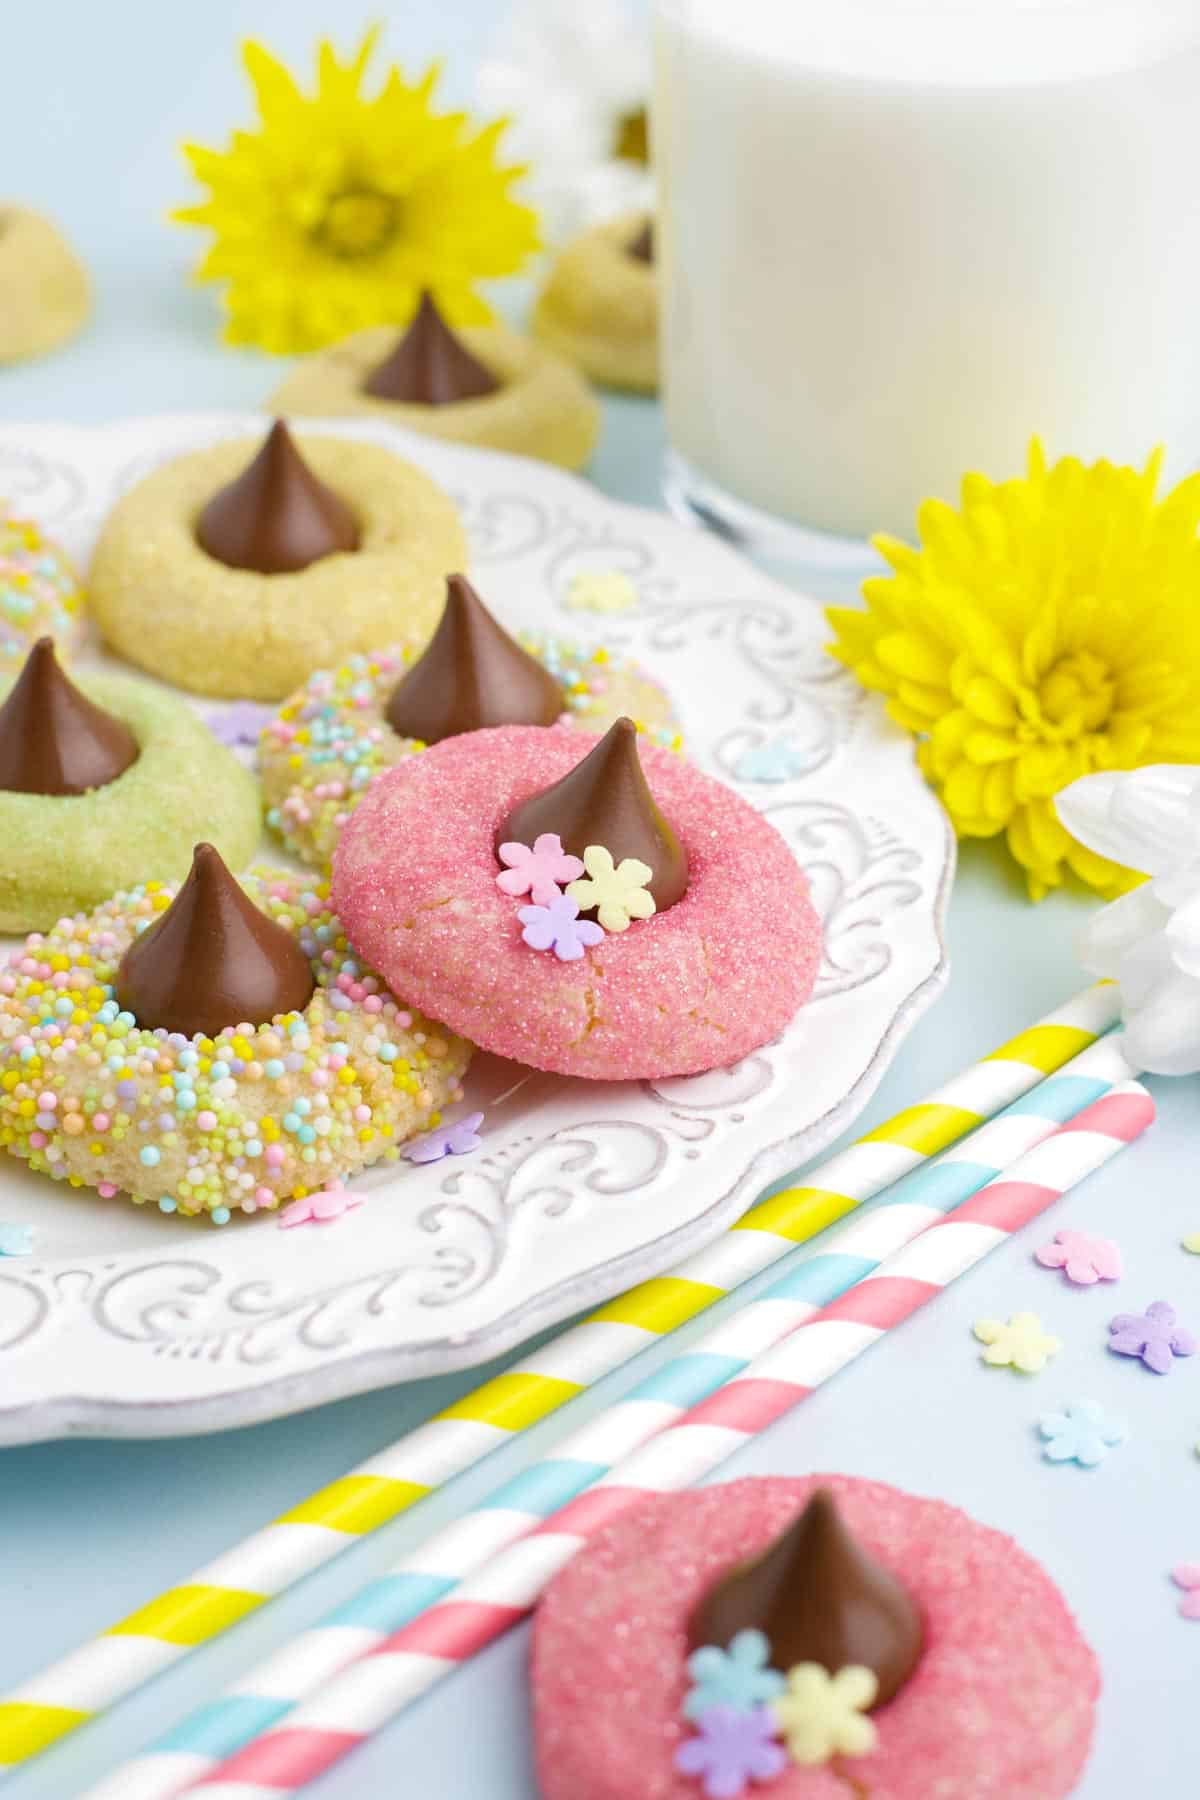 Spring blossom cookies on a white plate with a yellow straw and pastel colored straws beside the plate.